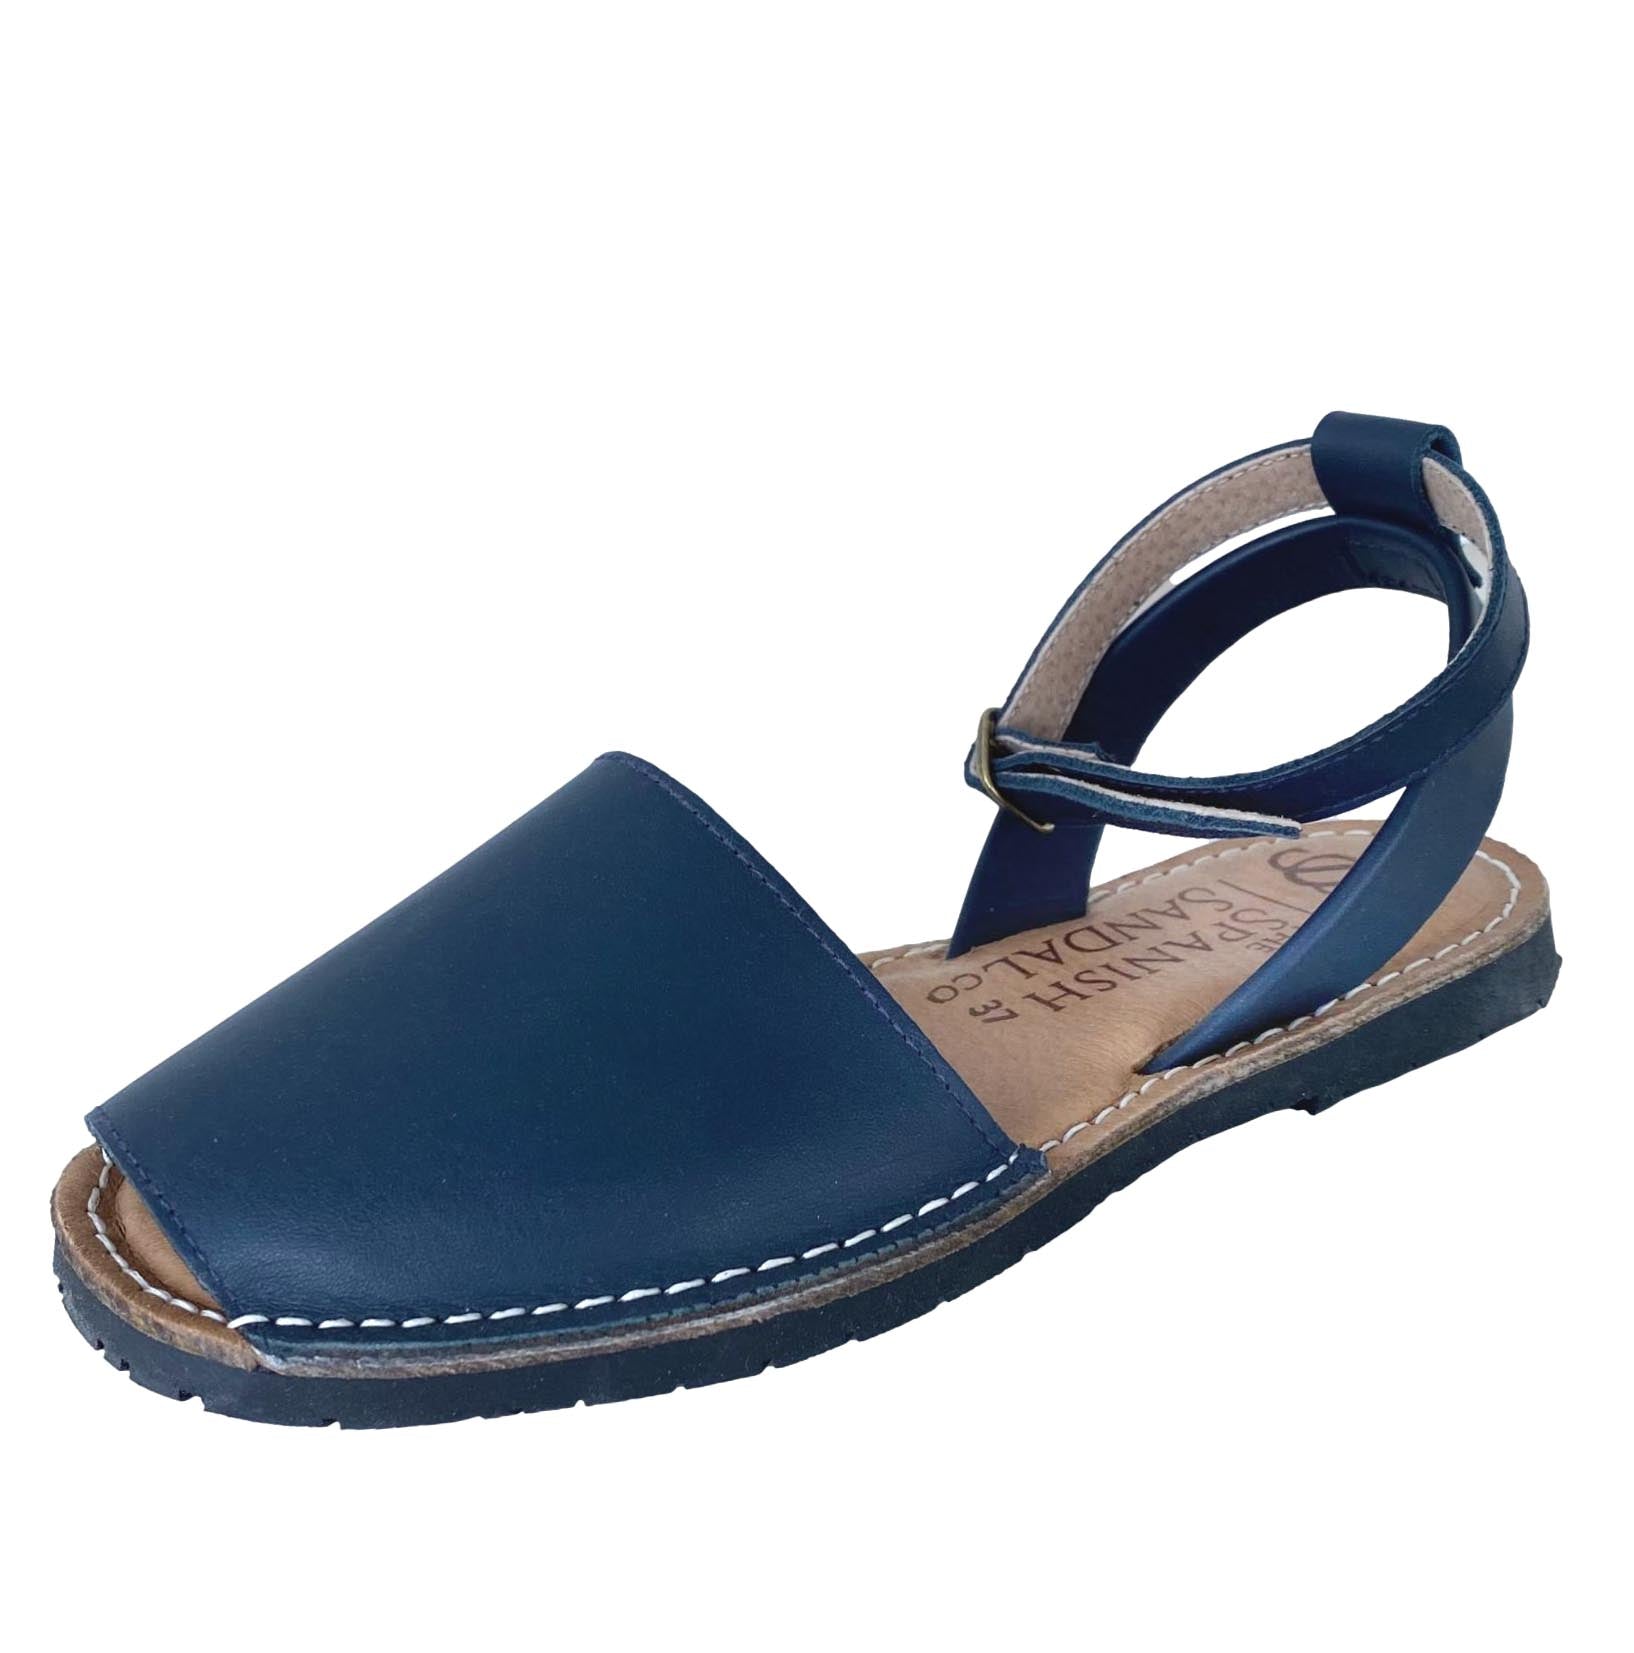 Navy blue sandals with strap